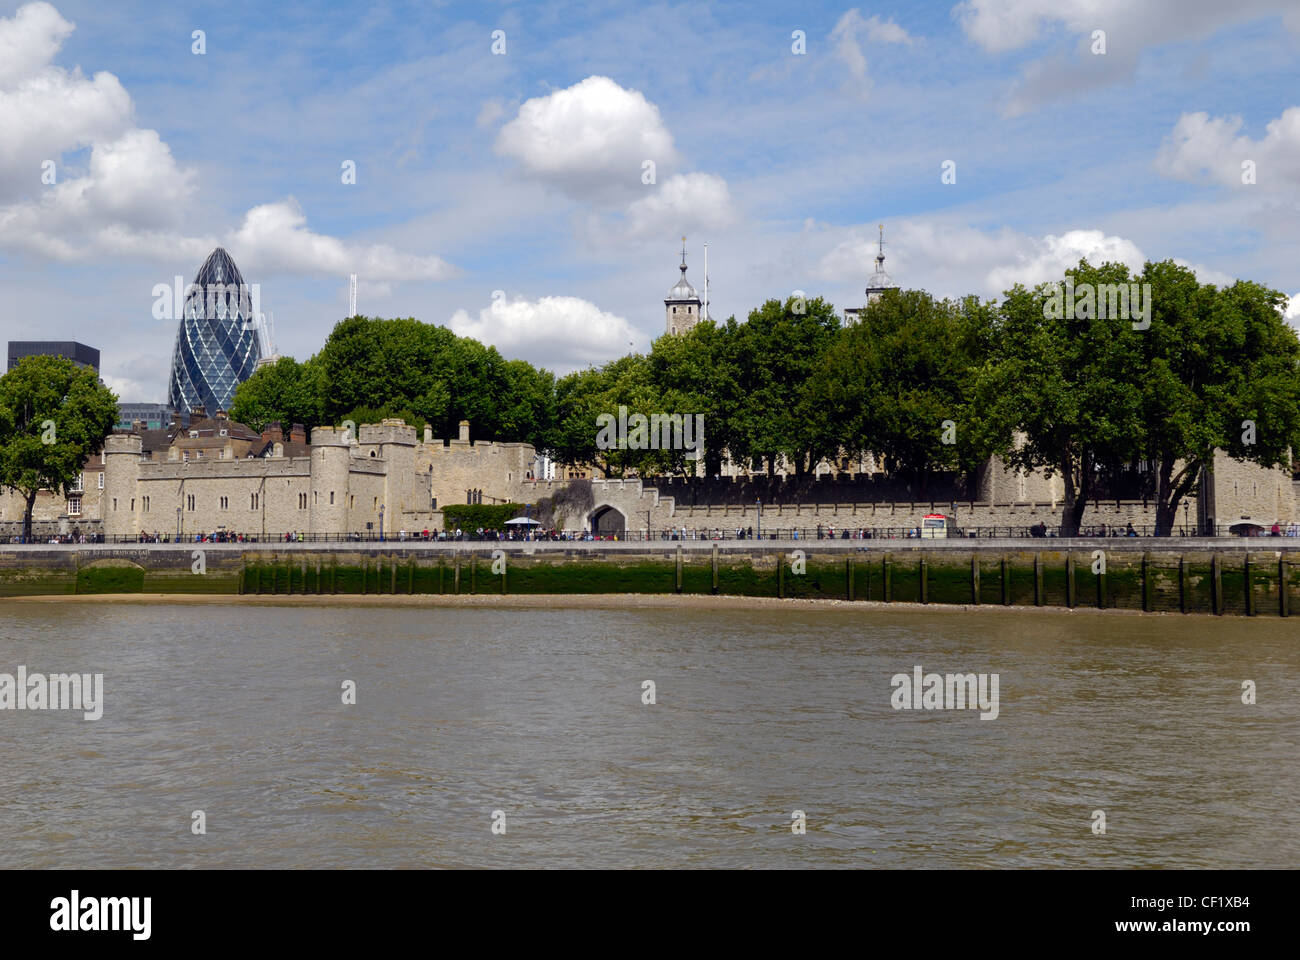 Two of London's iconic landmarks new and old. The Swiss Re Tower (Gherkin) and the Tower of London viewed from a boat on the riv Stock Photo